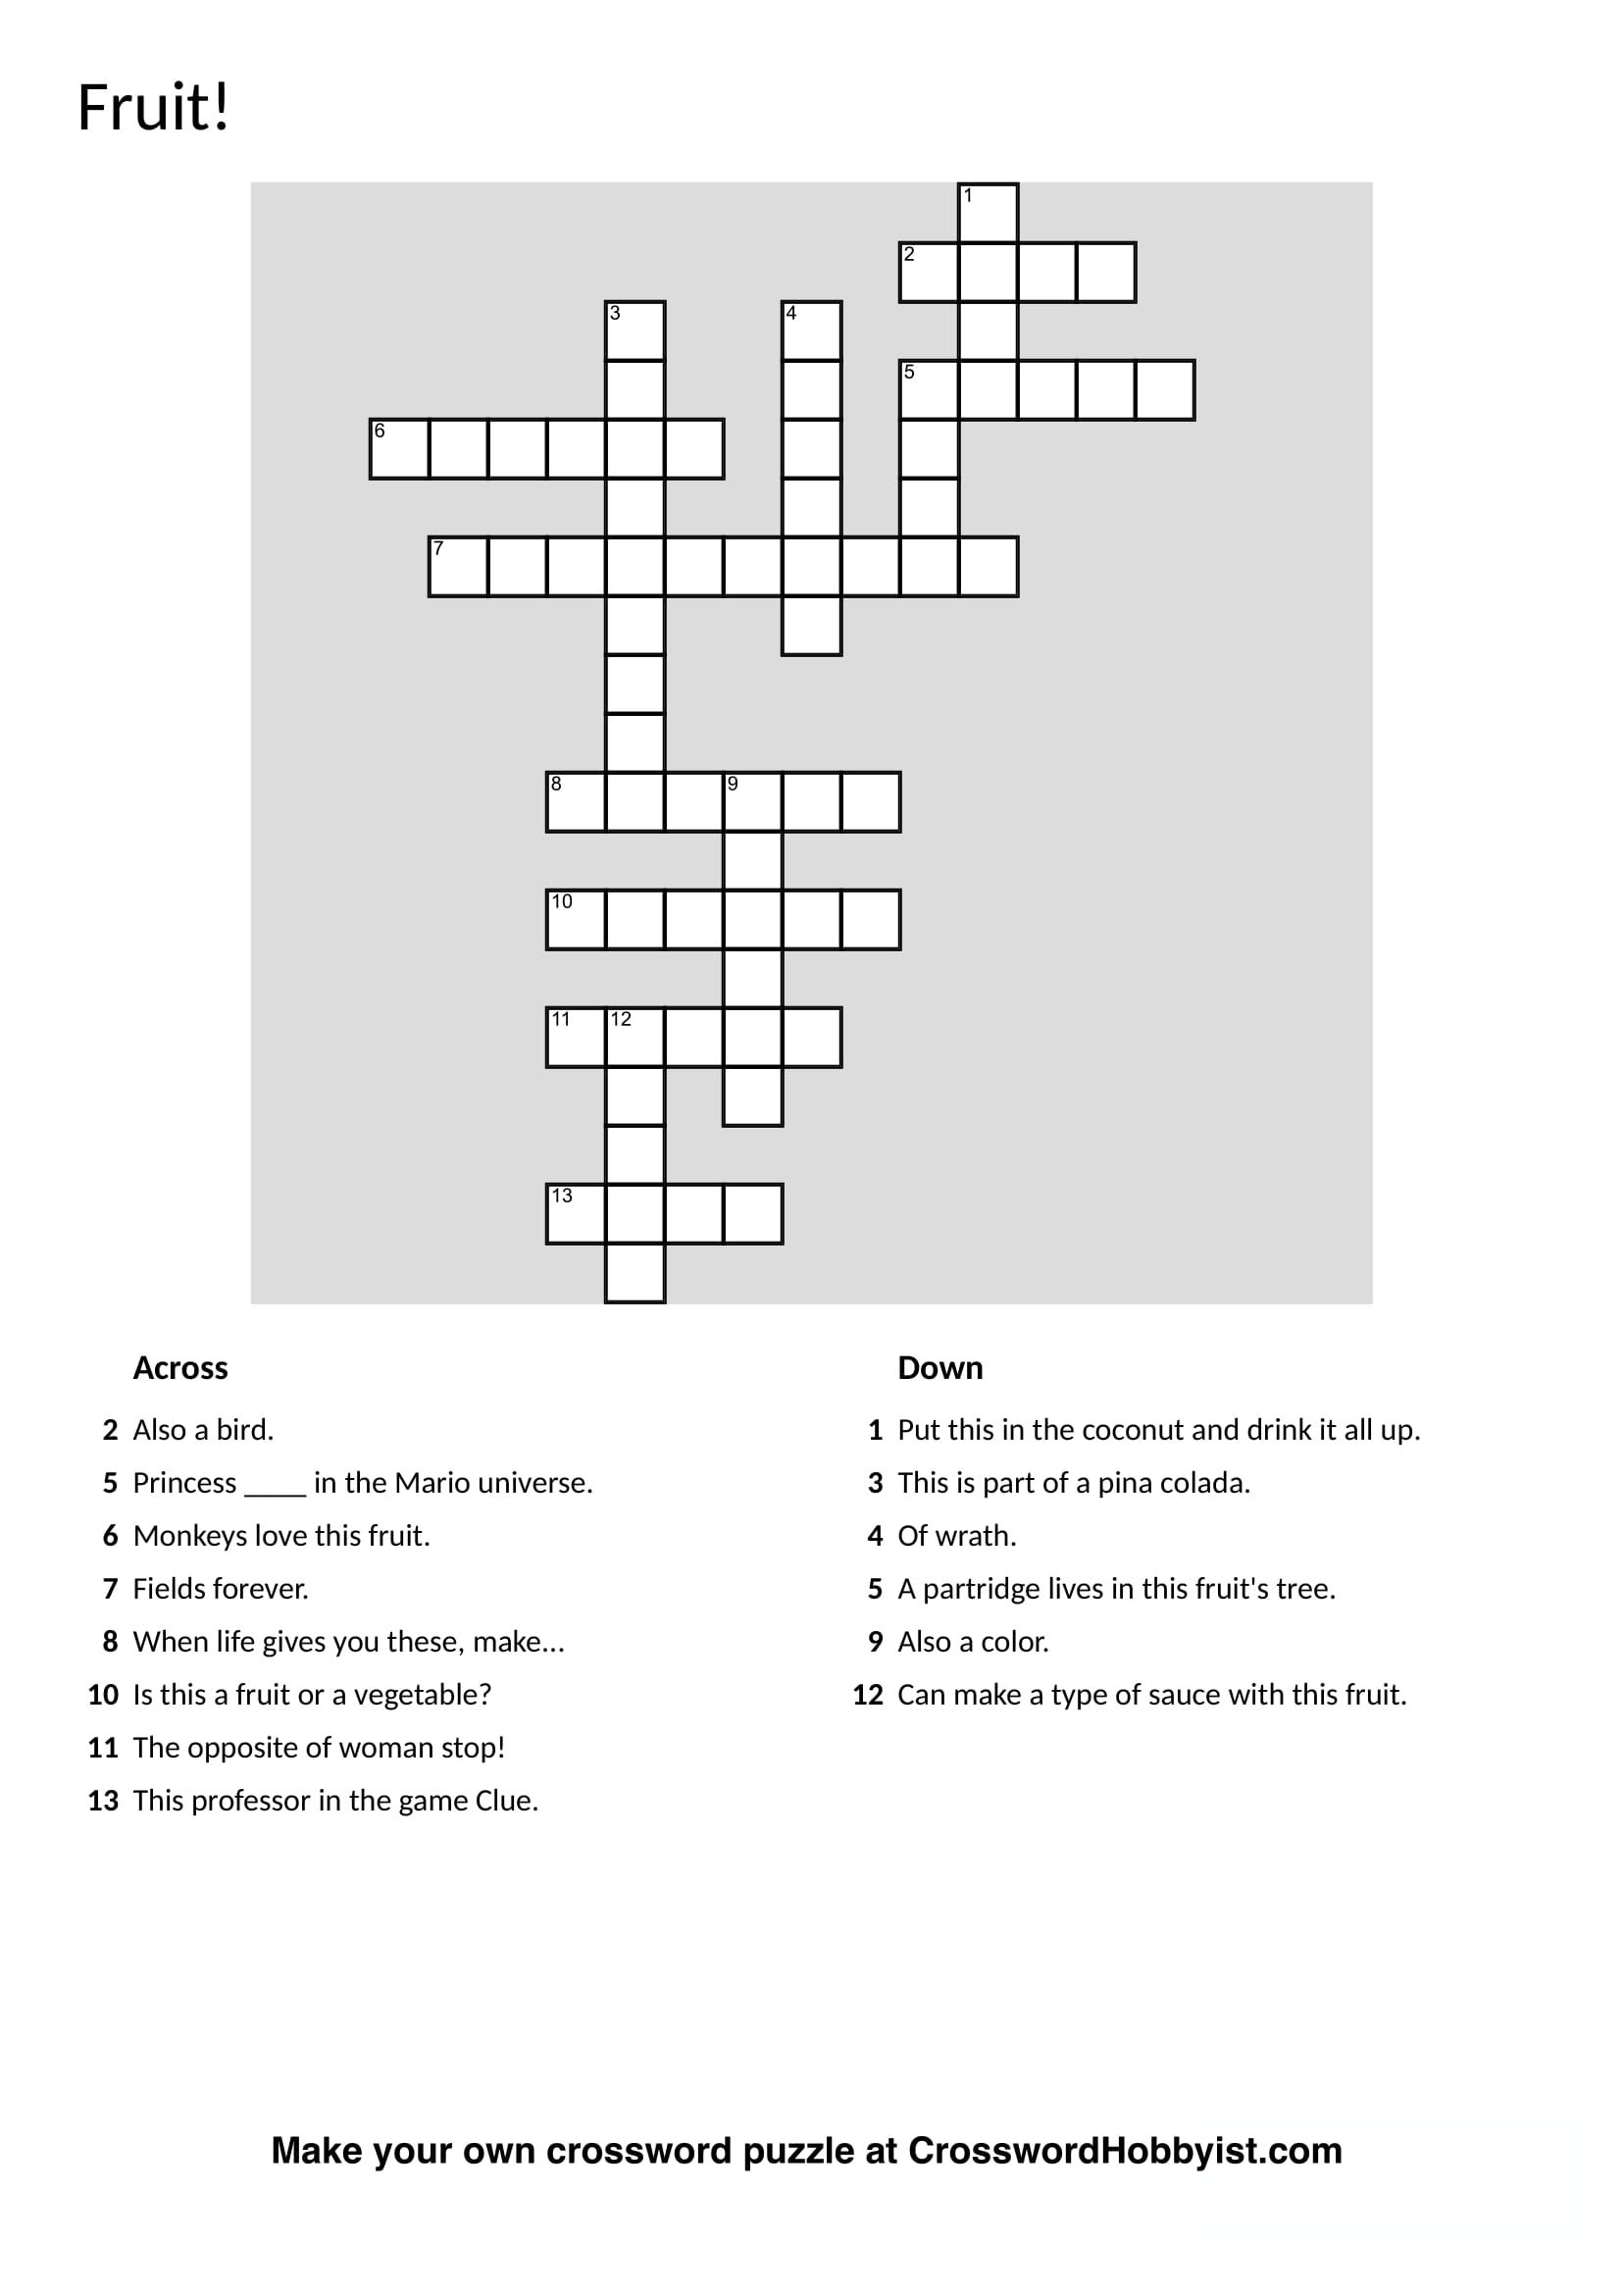 Make Your Own Fun Crossword Puzzles With Crosswordhobbyist - Crossword Puzzle Maker Free Printable No Download